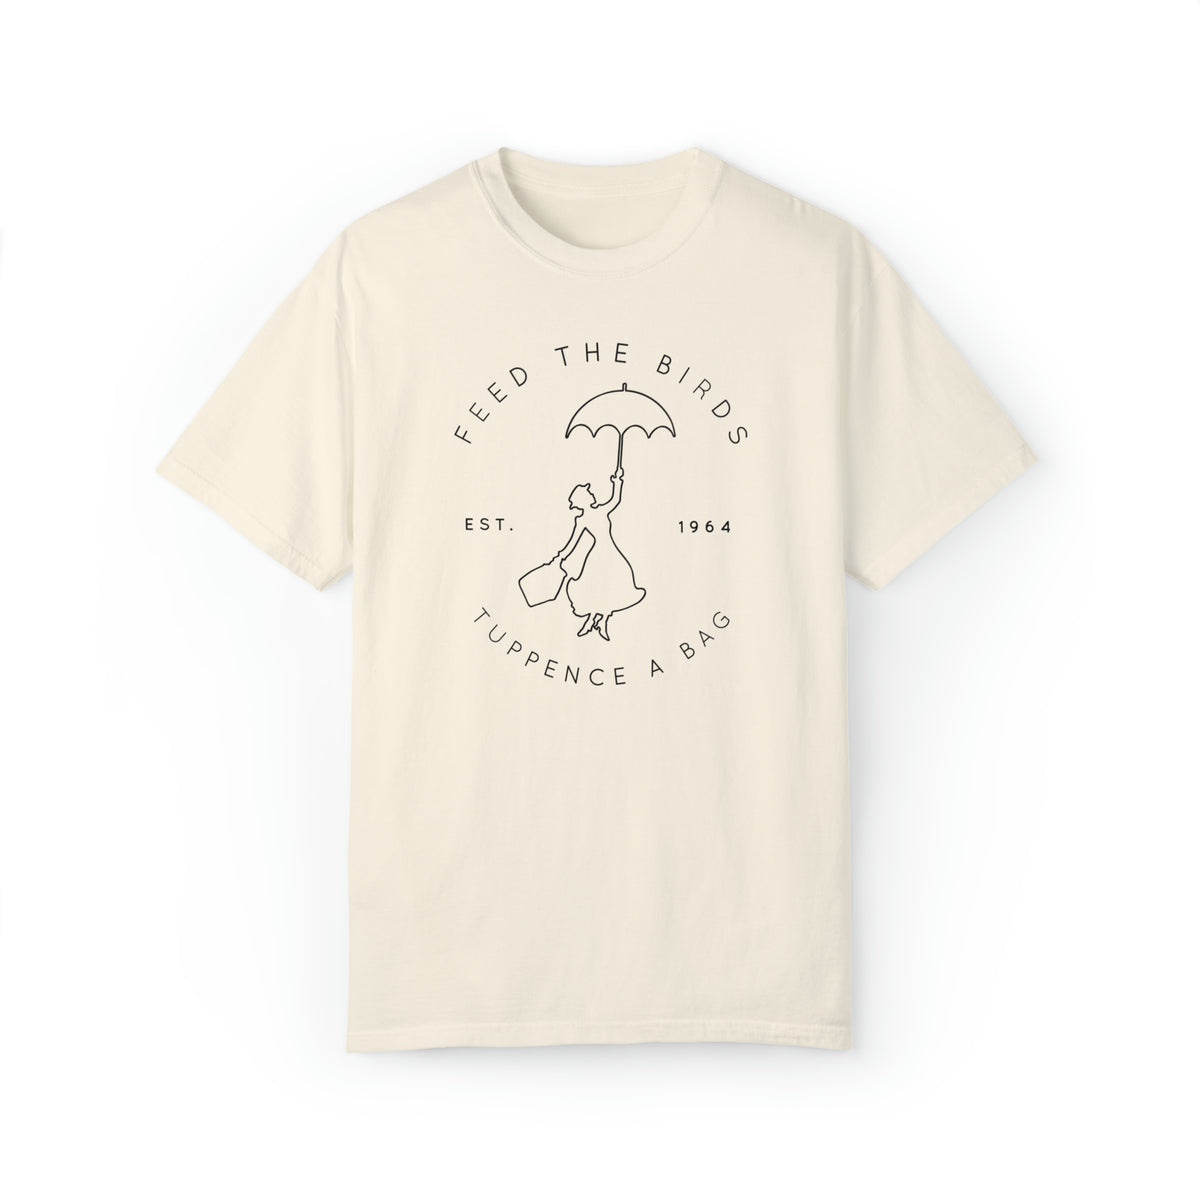 Feed the Birds Tuppence A Bag Comfort Colors Unisex Garment-Dyed T-shirt